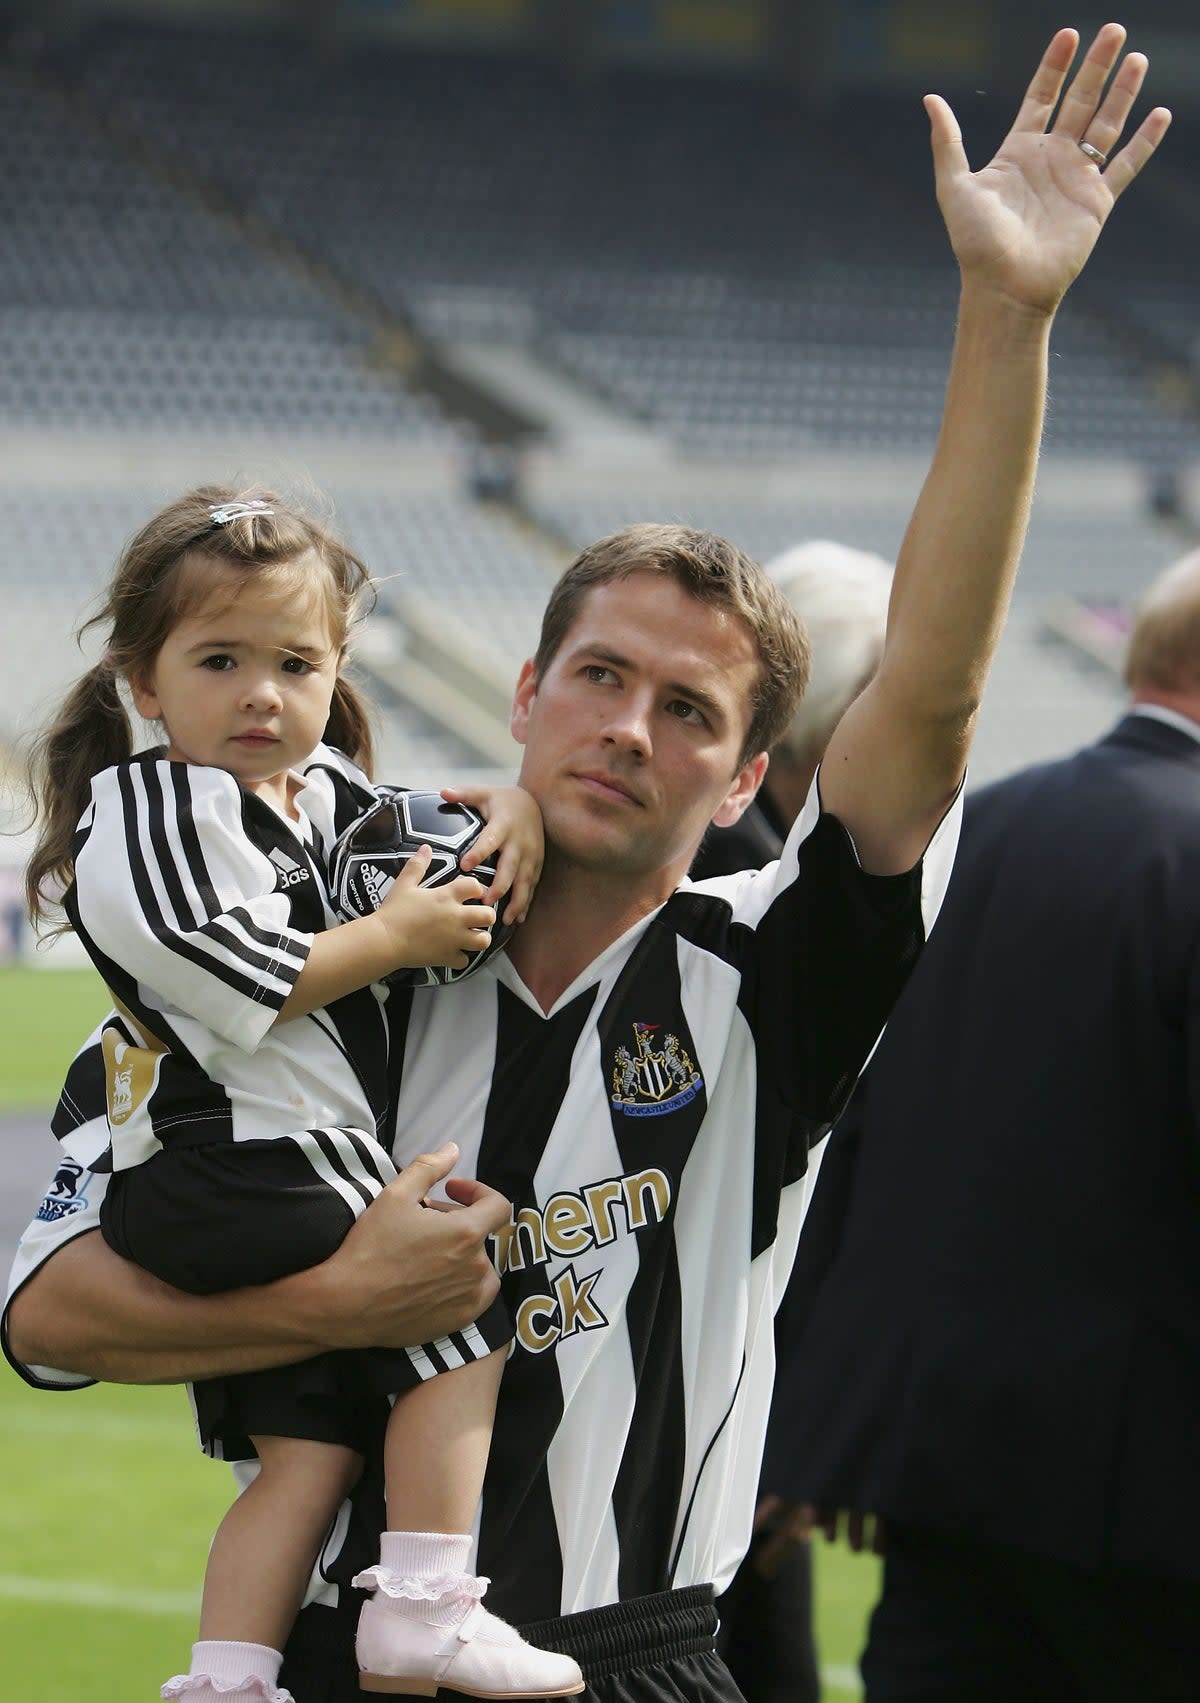 Gemma and Michael Owen in 2005 (Getty Images)